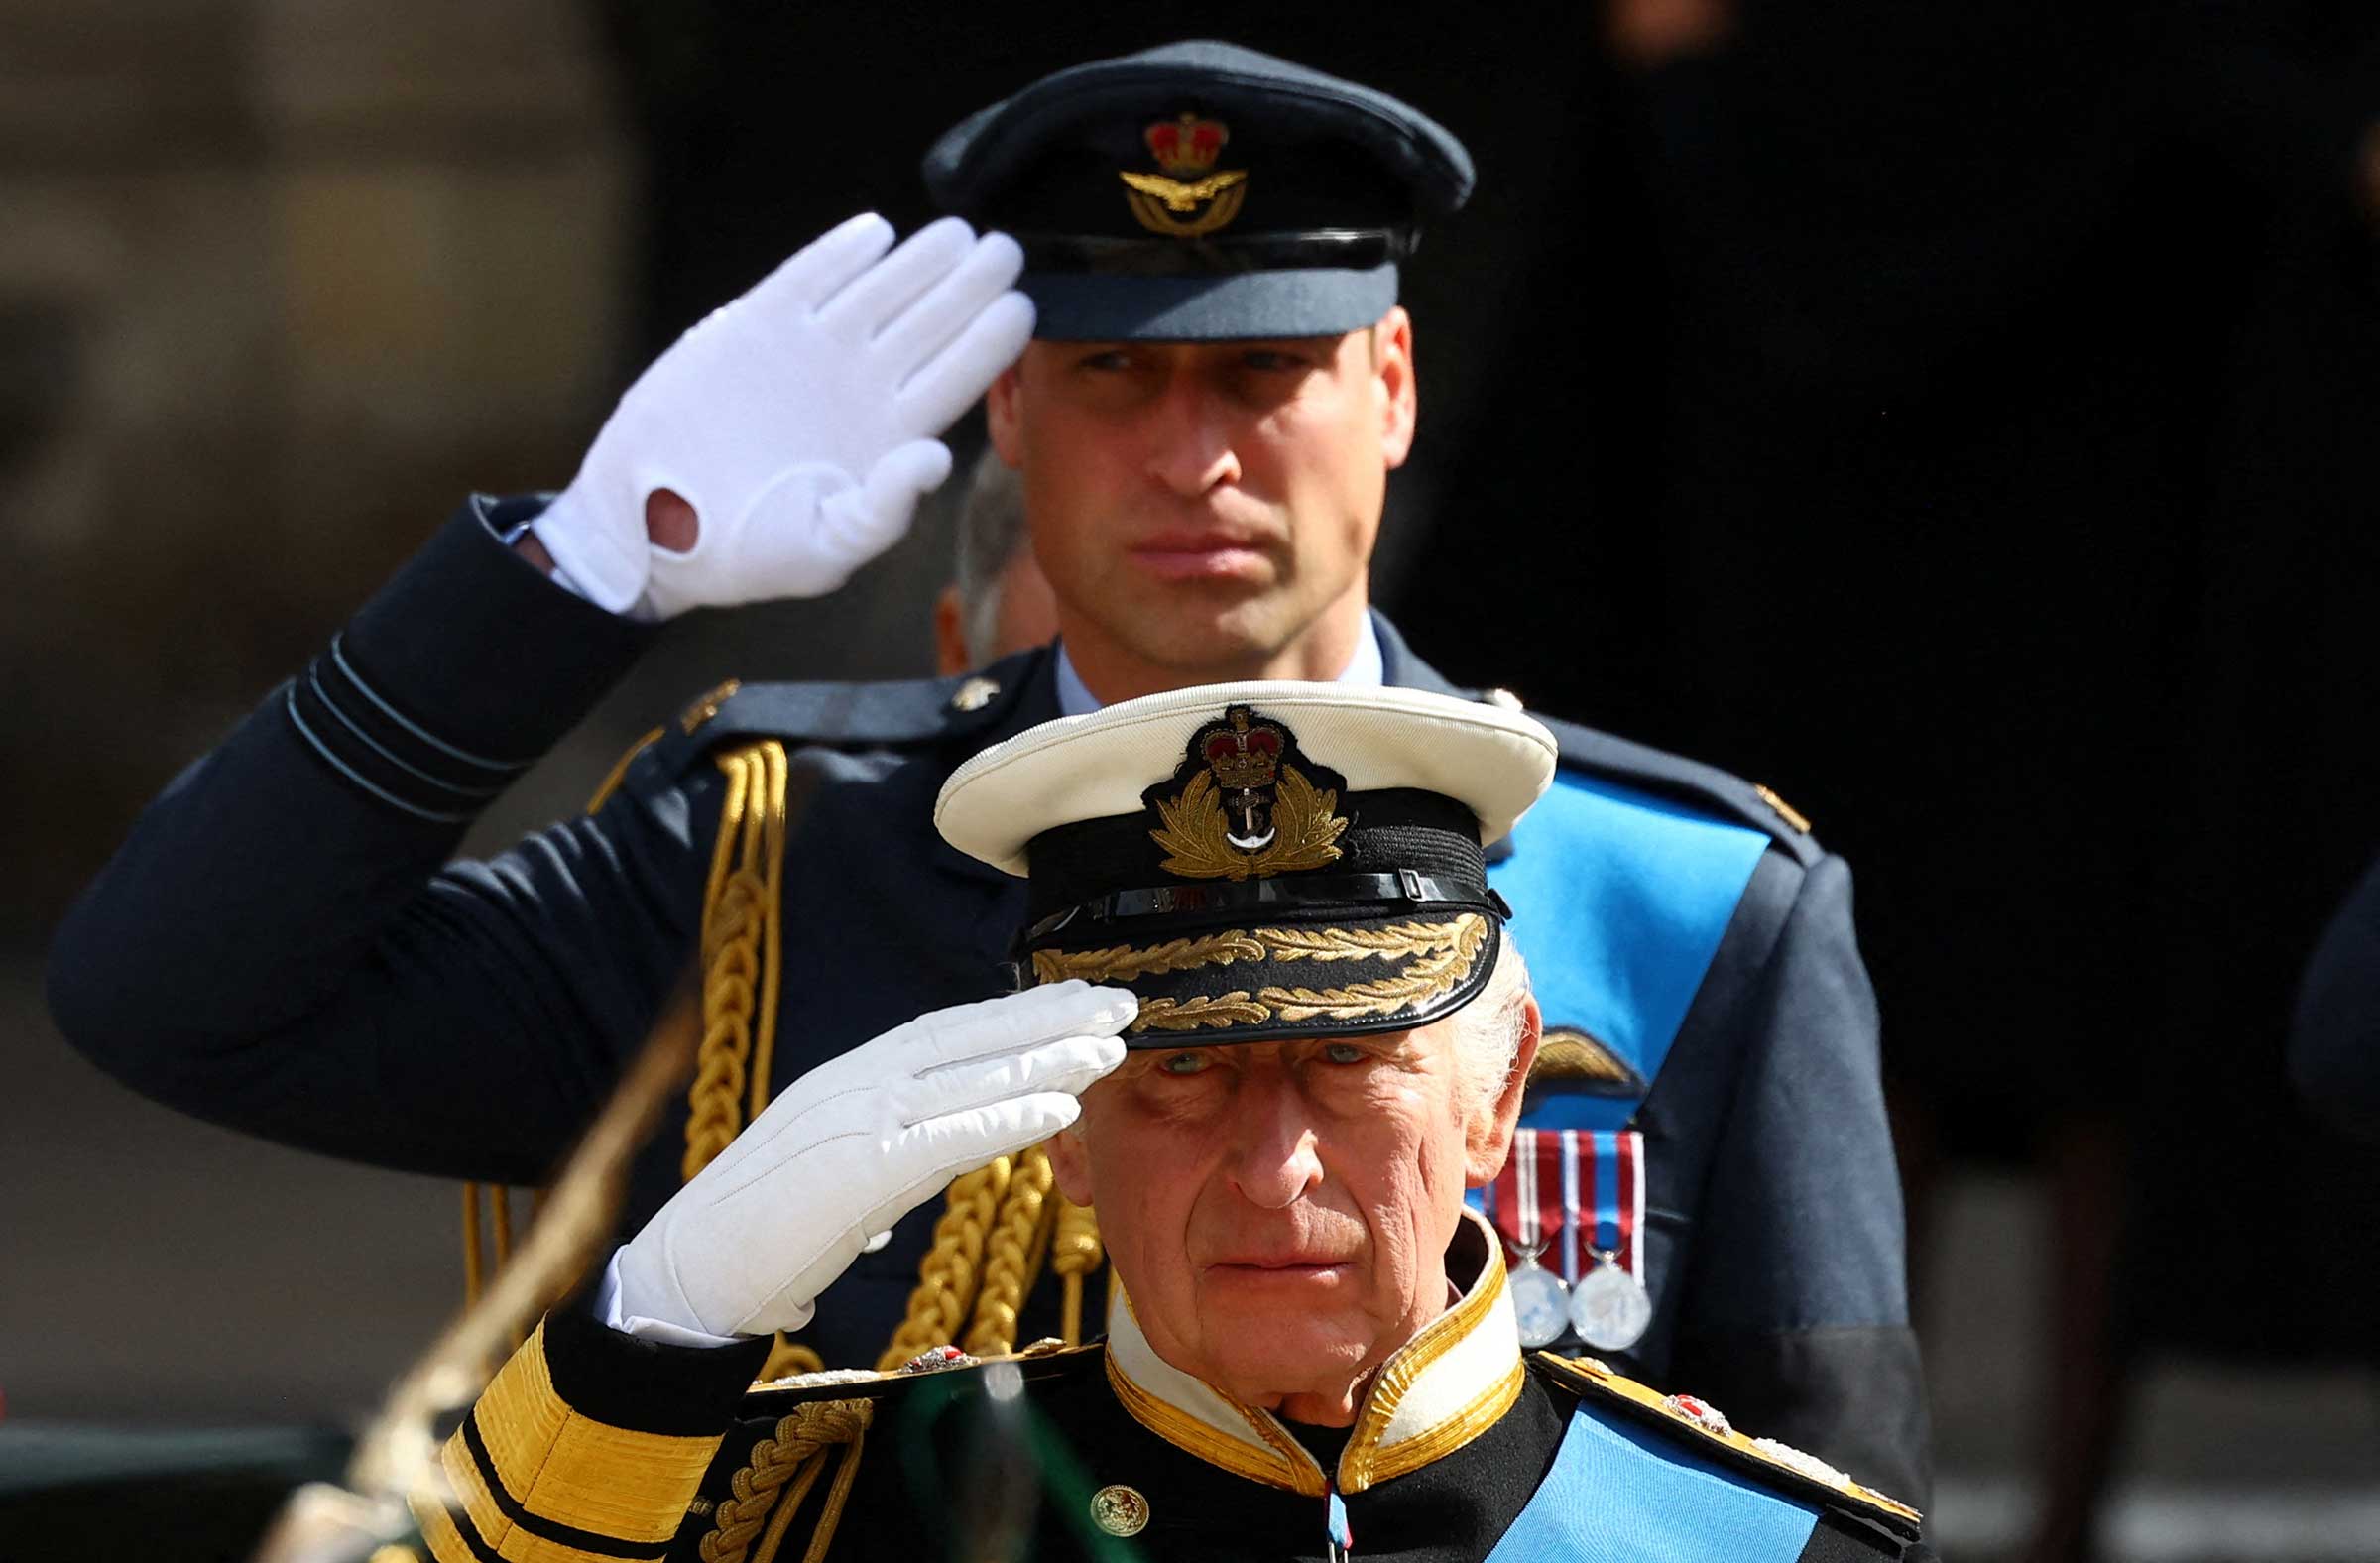 Britain's King Charles III and Britain's William, Prince of Wales attend the state funeral and burial of Britain's Queen Elizabeth, in London, Britain, September 19, 2022. (Hannah McKay—Pool/AFP/Getty Images)